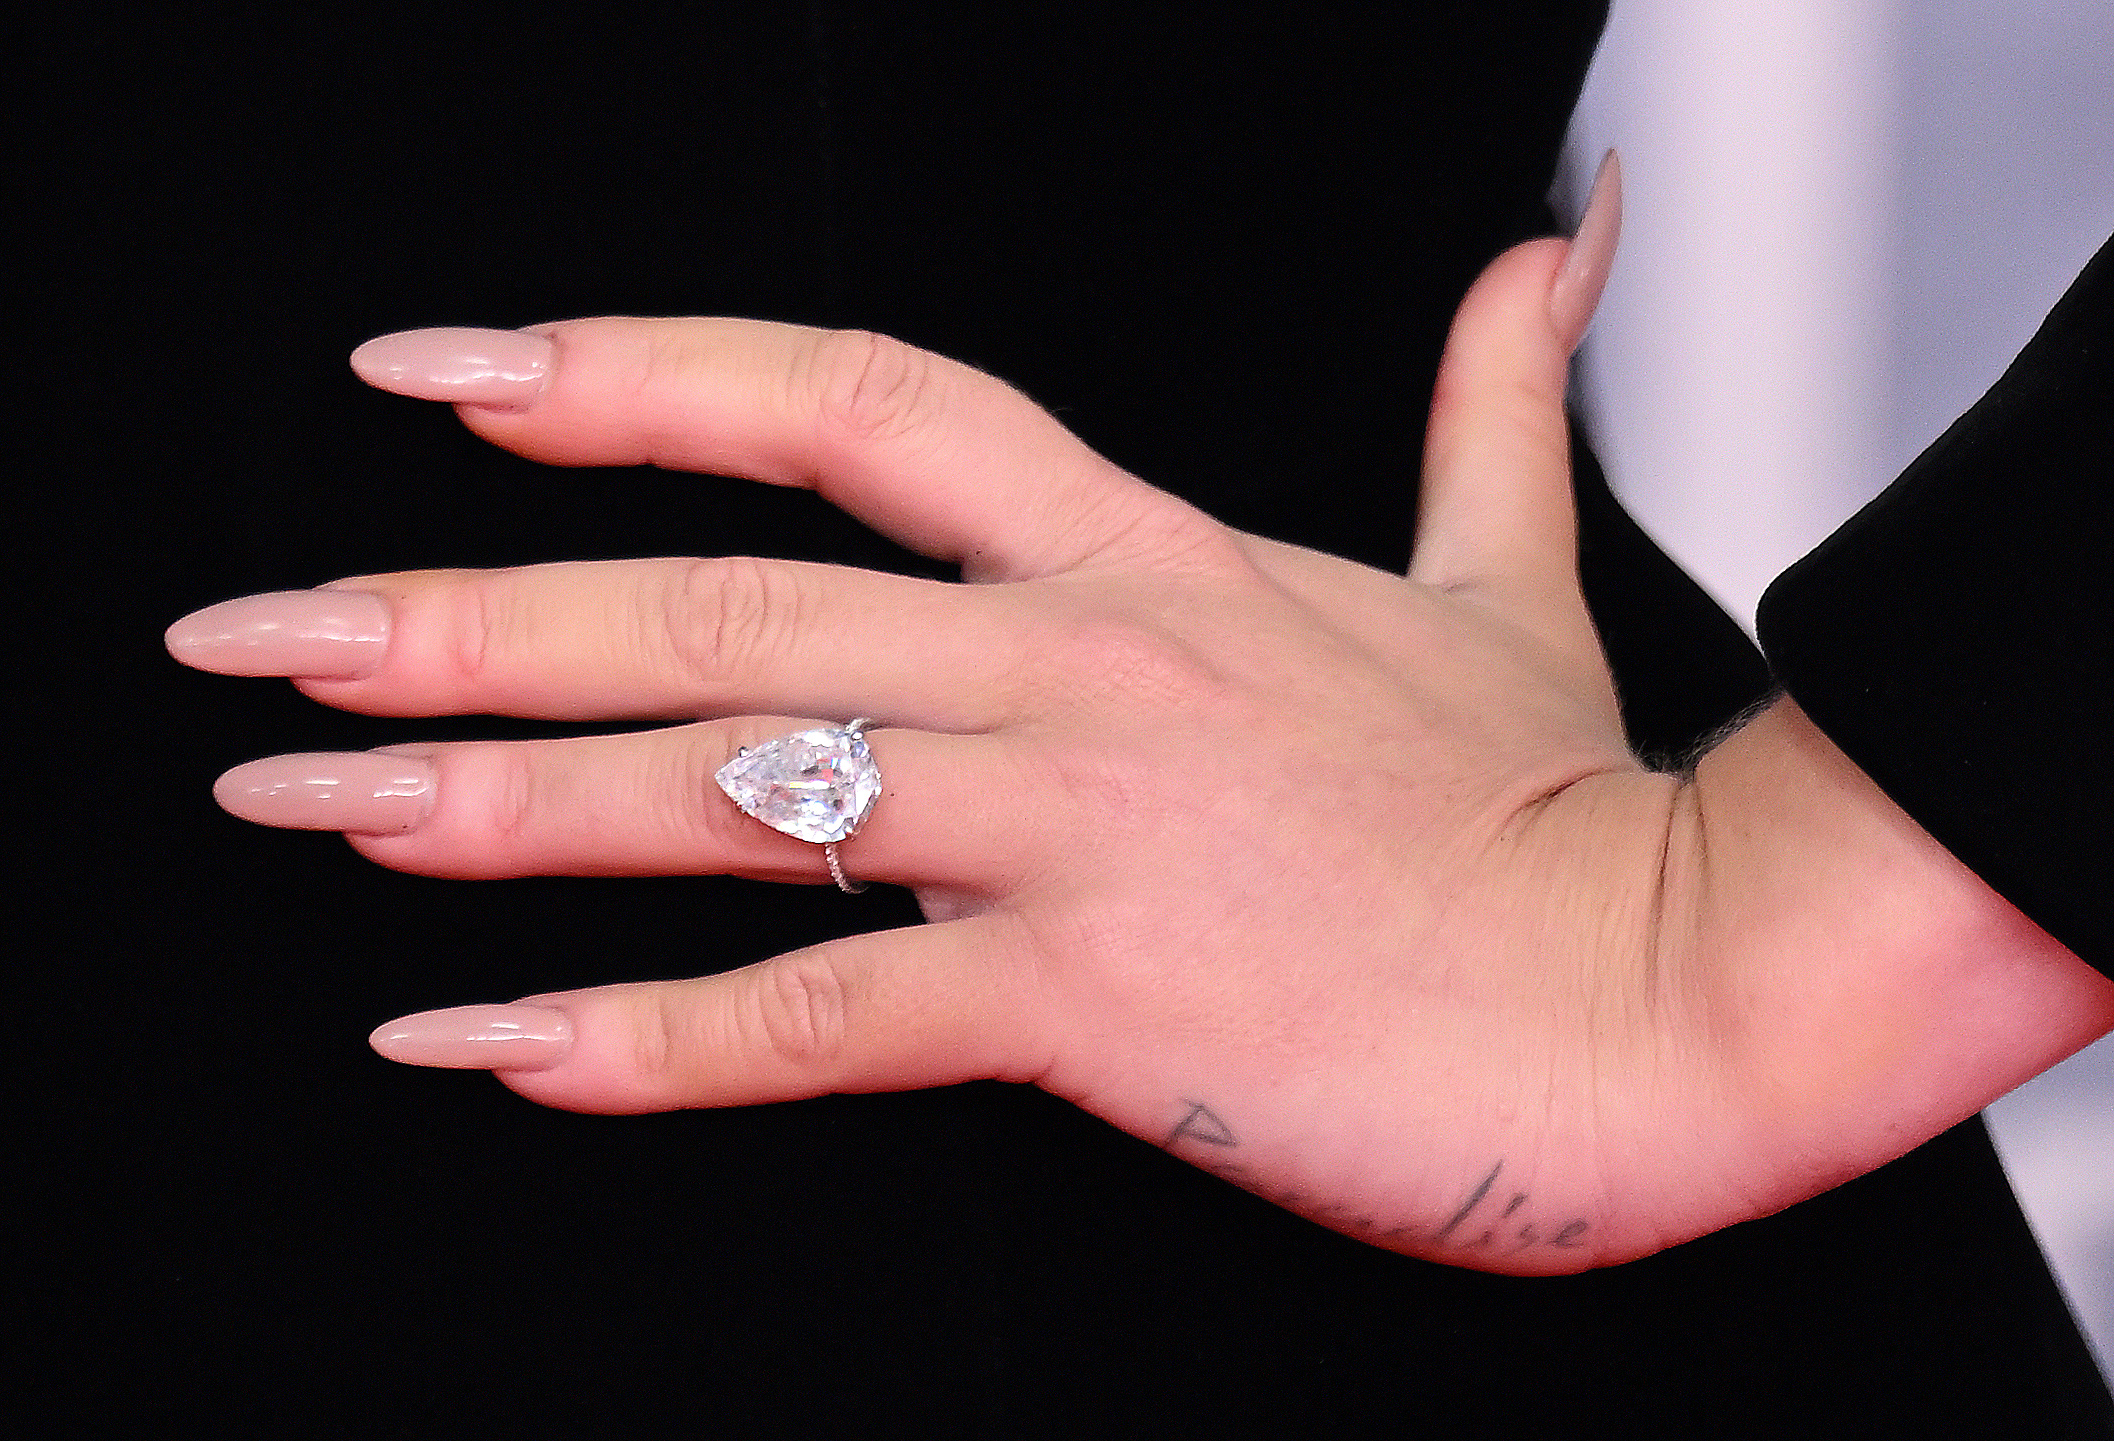 Adele's ring detail as she attends The BRIT Awards 2022 in London, England on February 08, 2022 | Source: Getty Images